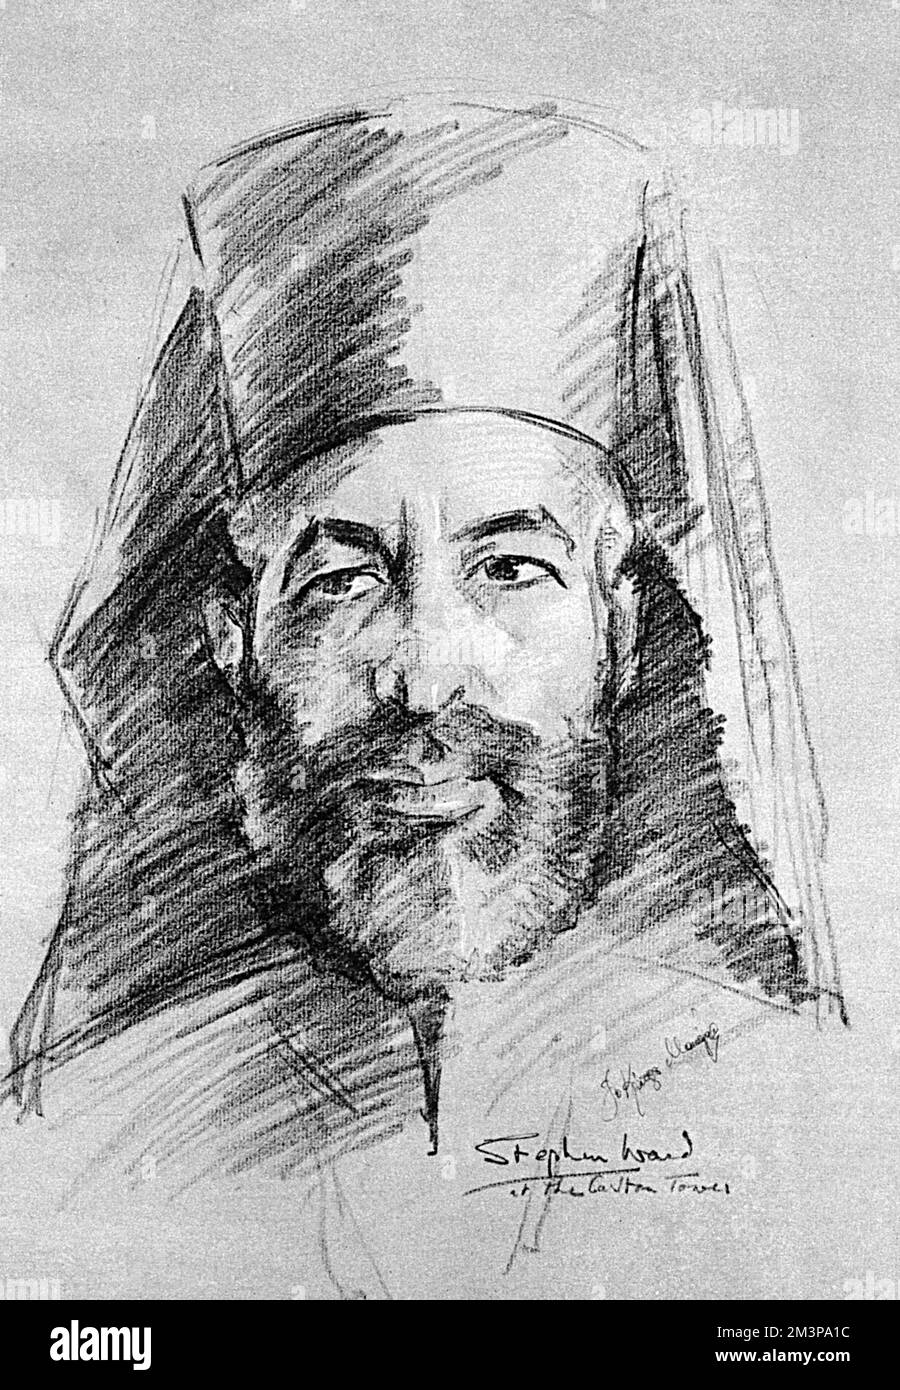 Archbishop Makarios III(1913-1977), president and ethnarch of Cyprus, picture at the time of his offer of a large reward for the discovery of the murderer of a young British architect, Peter Gray, who was shot dead in Kyrenia on 12th May 1961. This sketch was drawn from life by Stephen Ward, at a sitting specially granted to the Illustrated London News in 1961. Ward sketched several high profile figures for the Illustrated London News in 1961, but two years later he would become notorious through his involvement in the Profumo Affair.     Date: 1961 Stock Photo